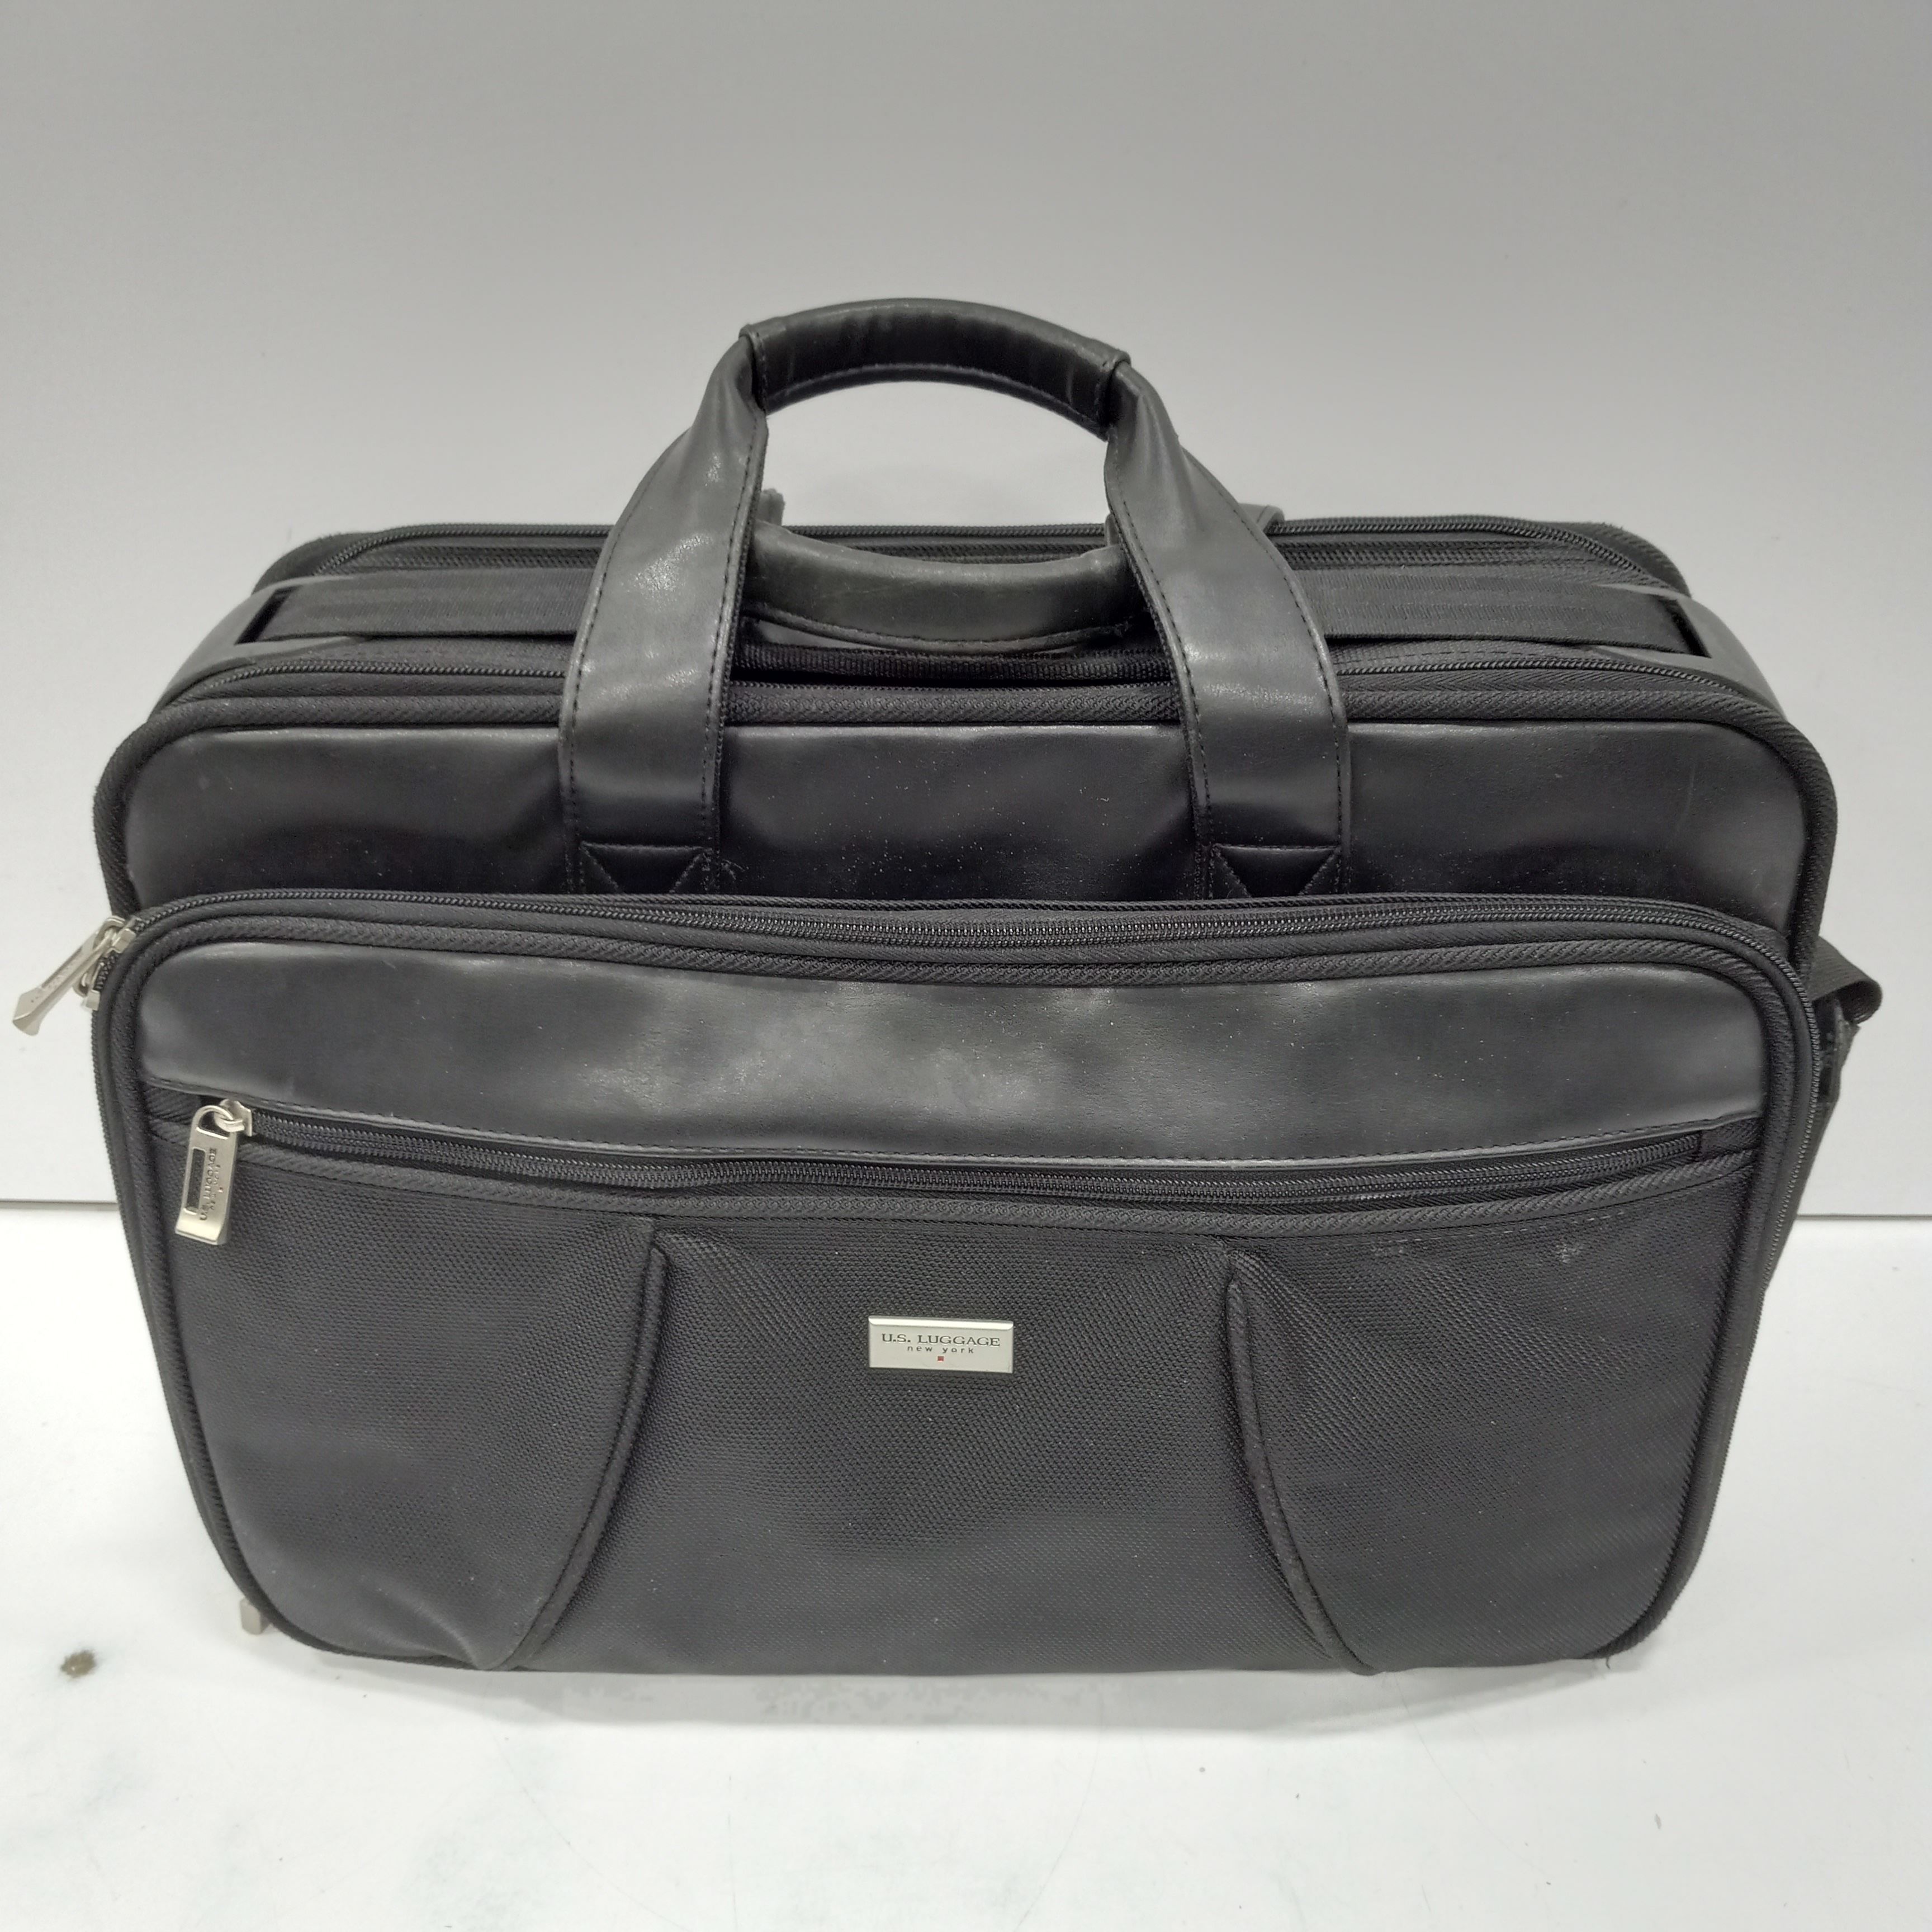 Buy the U.S Luggage New York Suitcase | GoodwillFinds